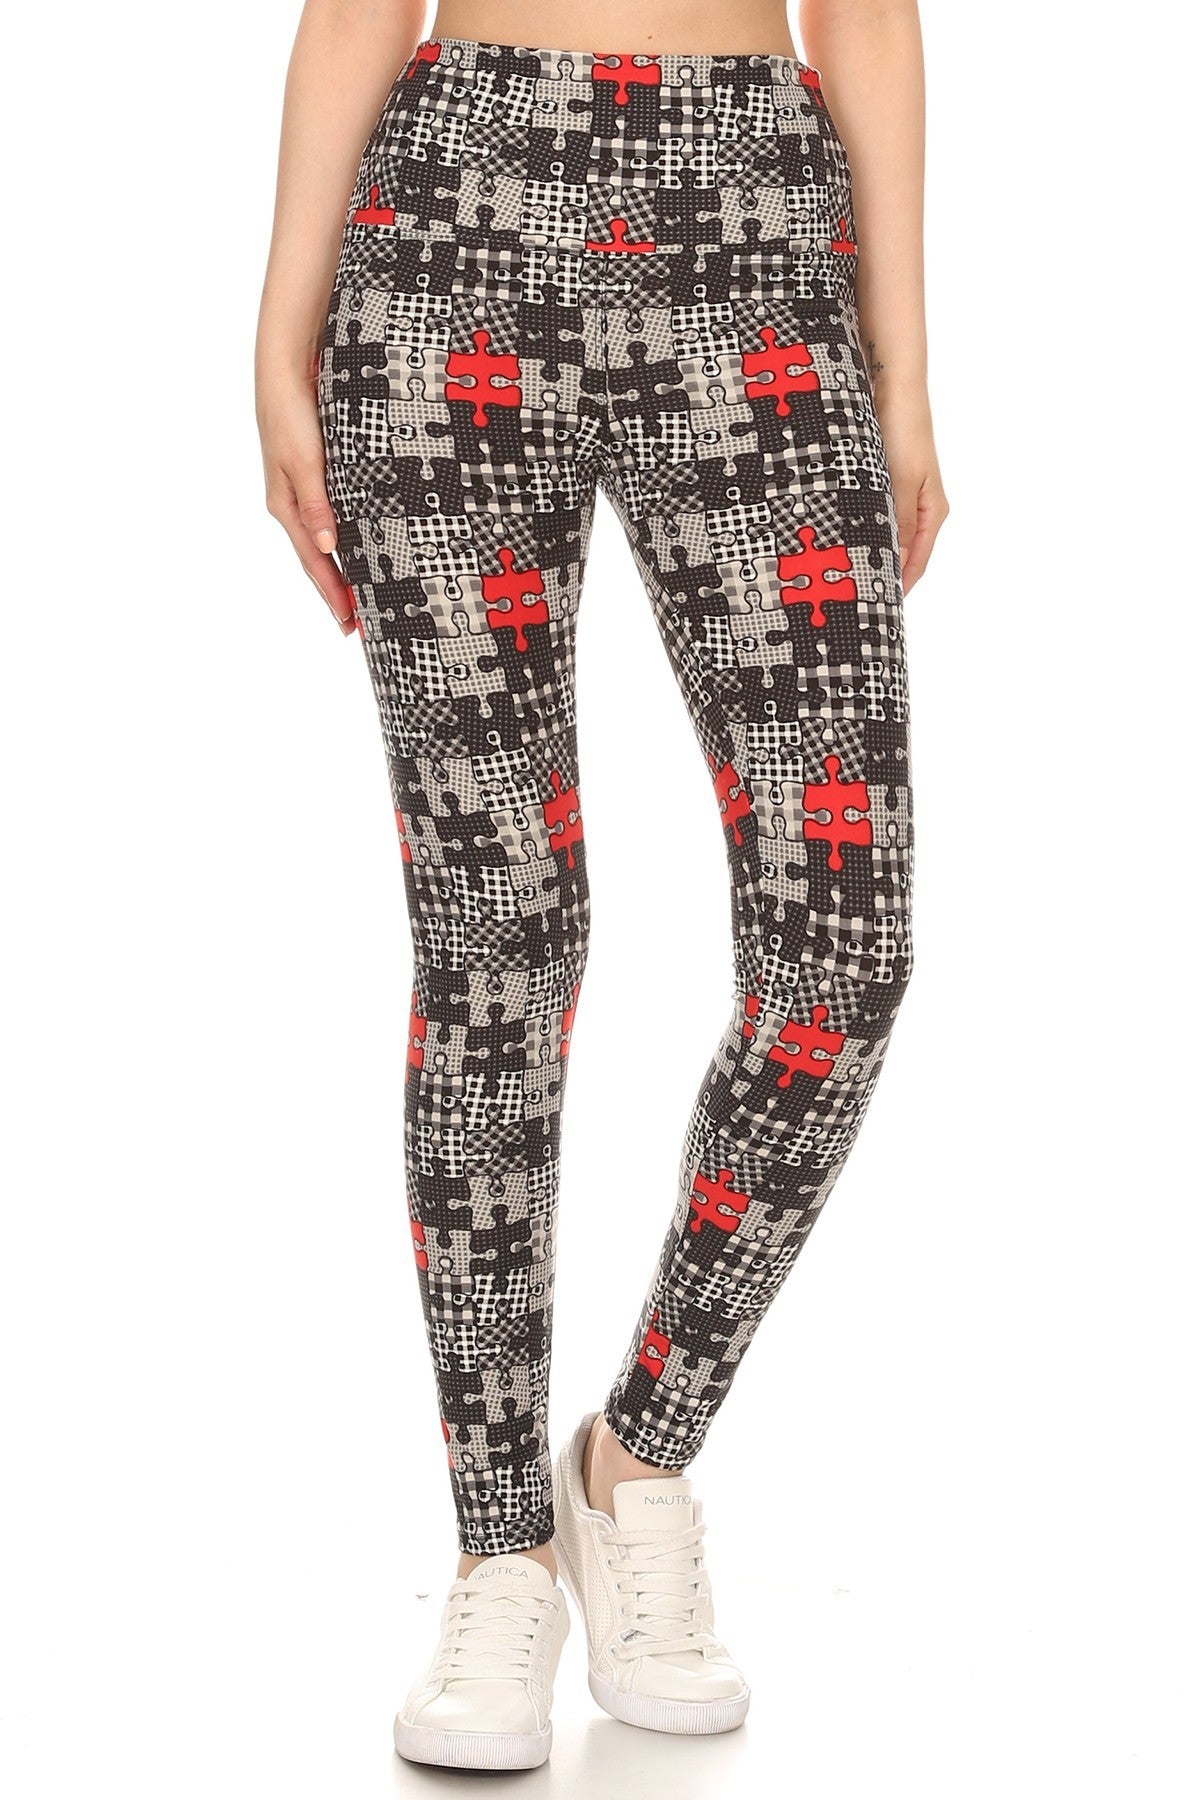 5-inch Long Yoga Style Banded Lined Puzzle Printed Knit Legging With High Waist king-general-store-5710.myshopify.com